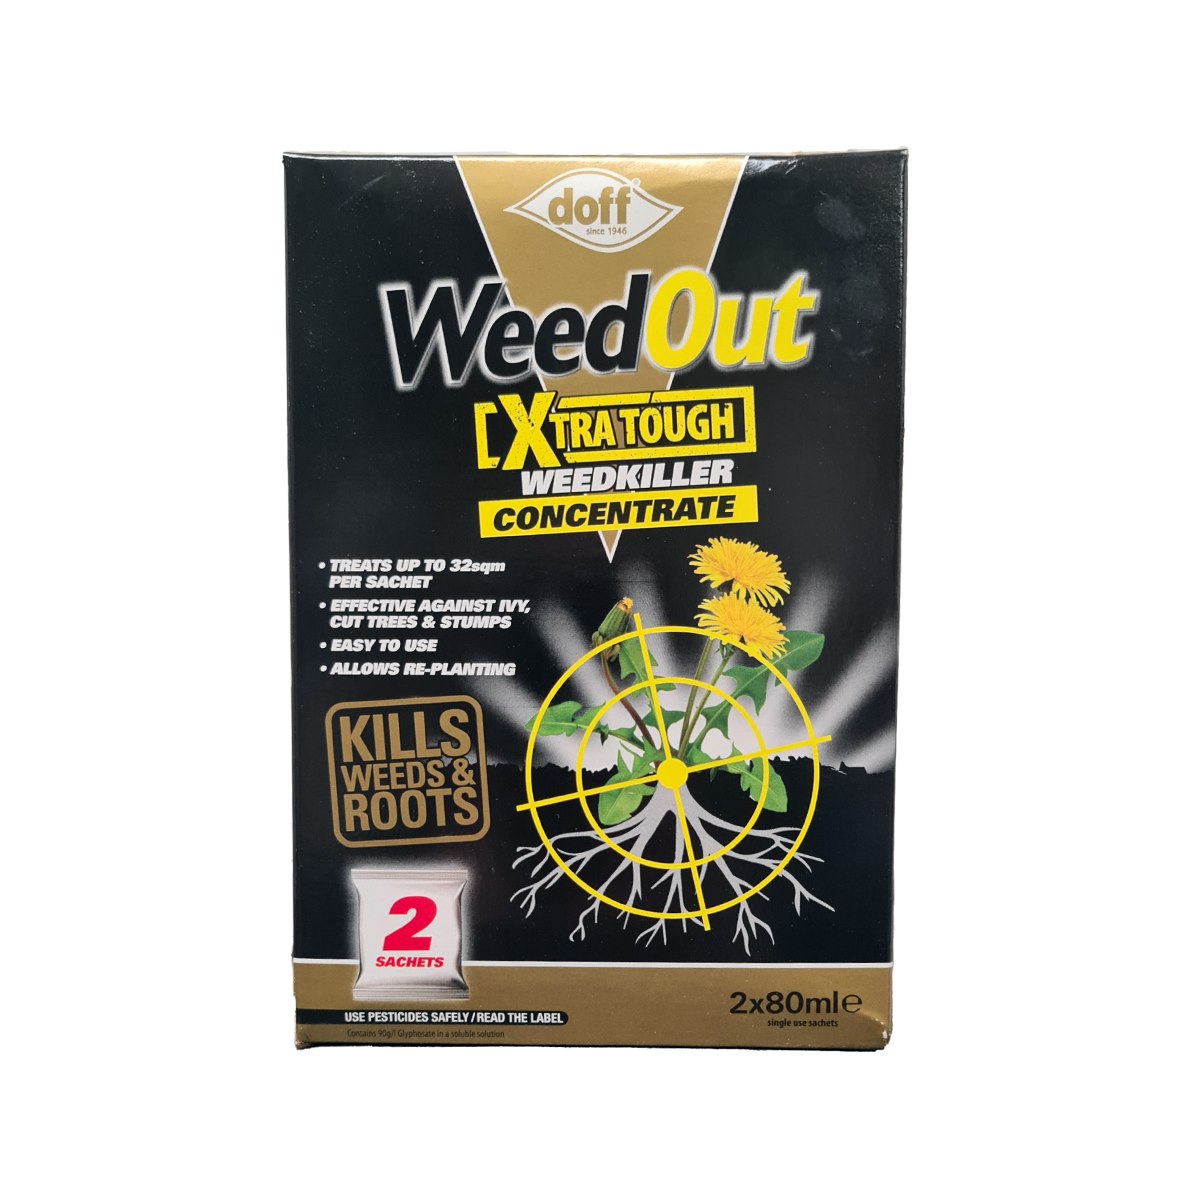 Doff Weedout Extra Tough Weed Killer Concentrate 2 x 80ml Sachets